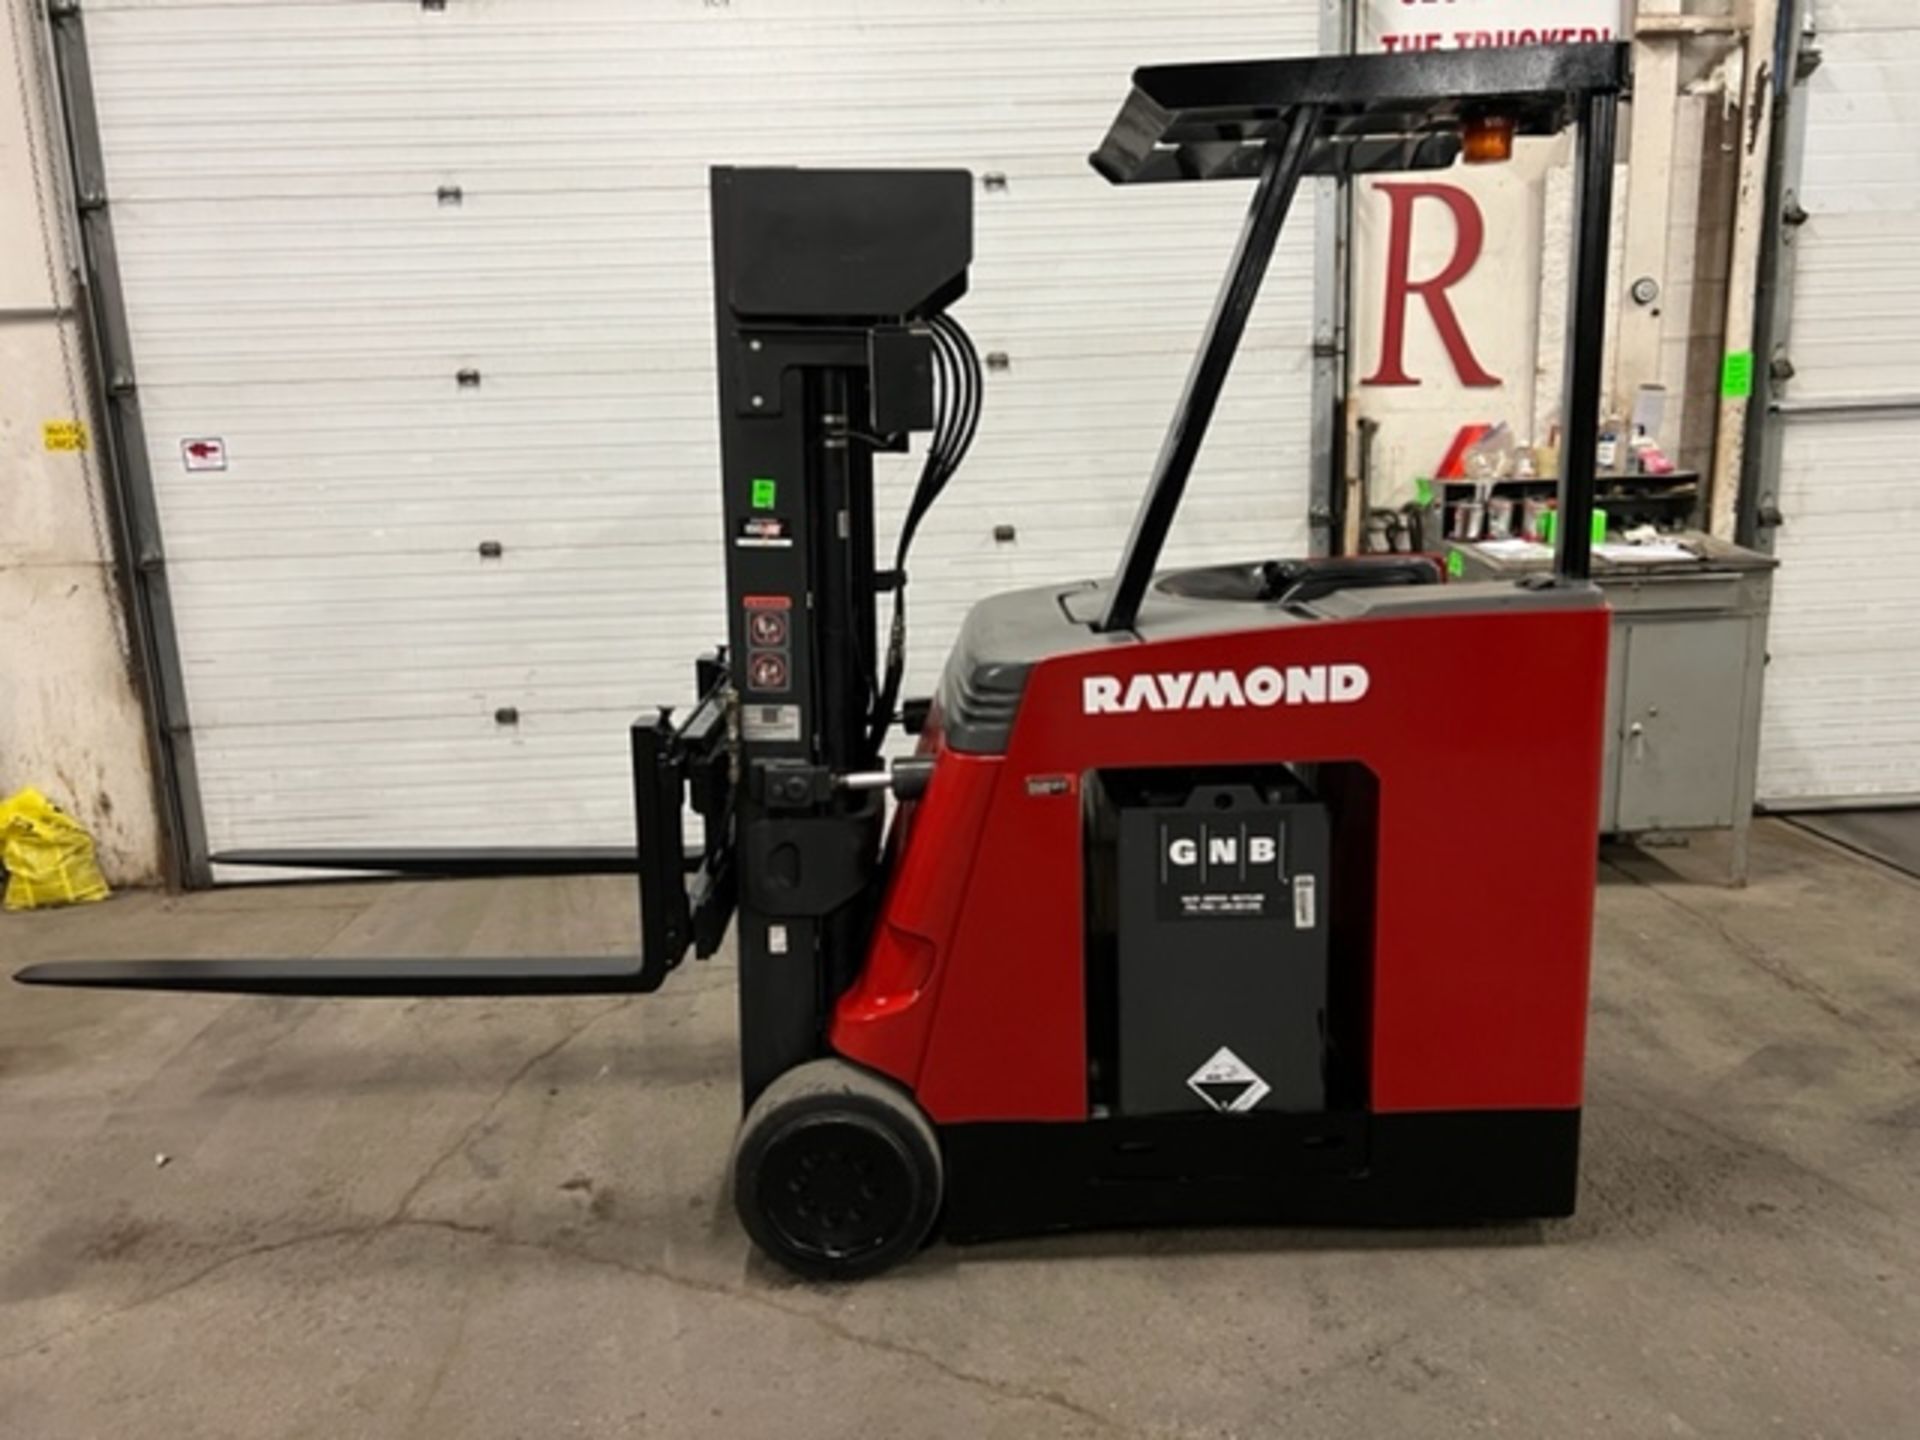 FREE CUSTOMS - NICE Raymond Stand Up Counterbalance Forklift Truck 4-STAGE MAST Pallet Lifter